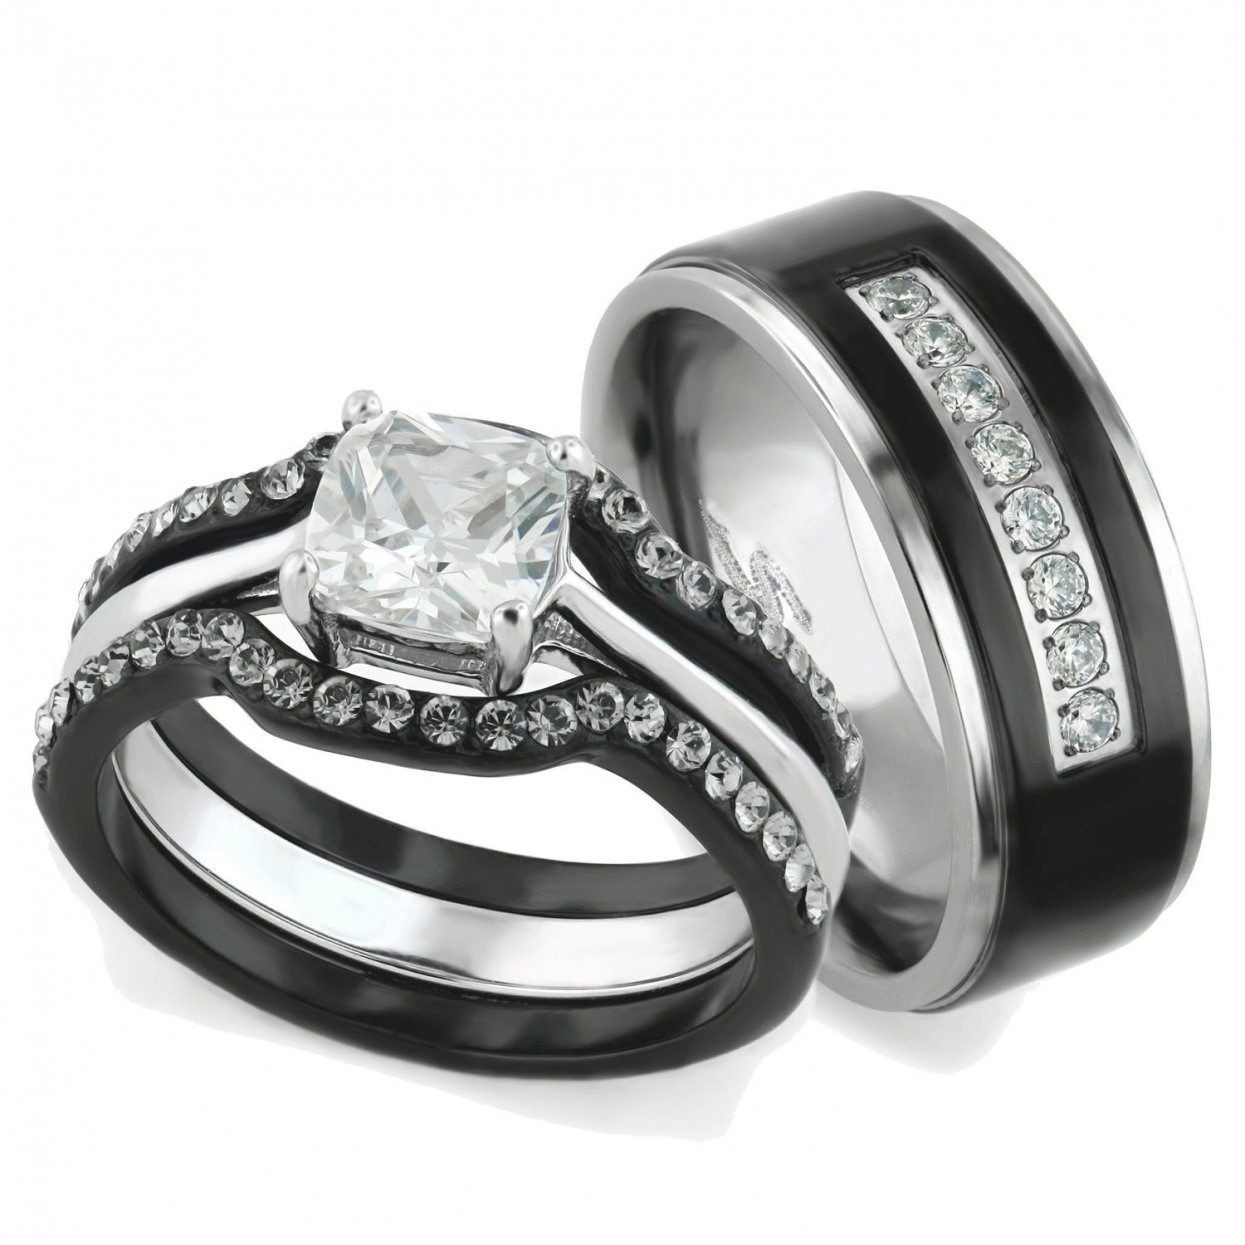 Zales Wedding Ring Sets For Him And Her
 Pin on Wedding ideas